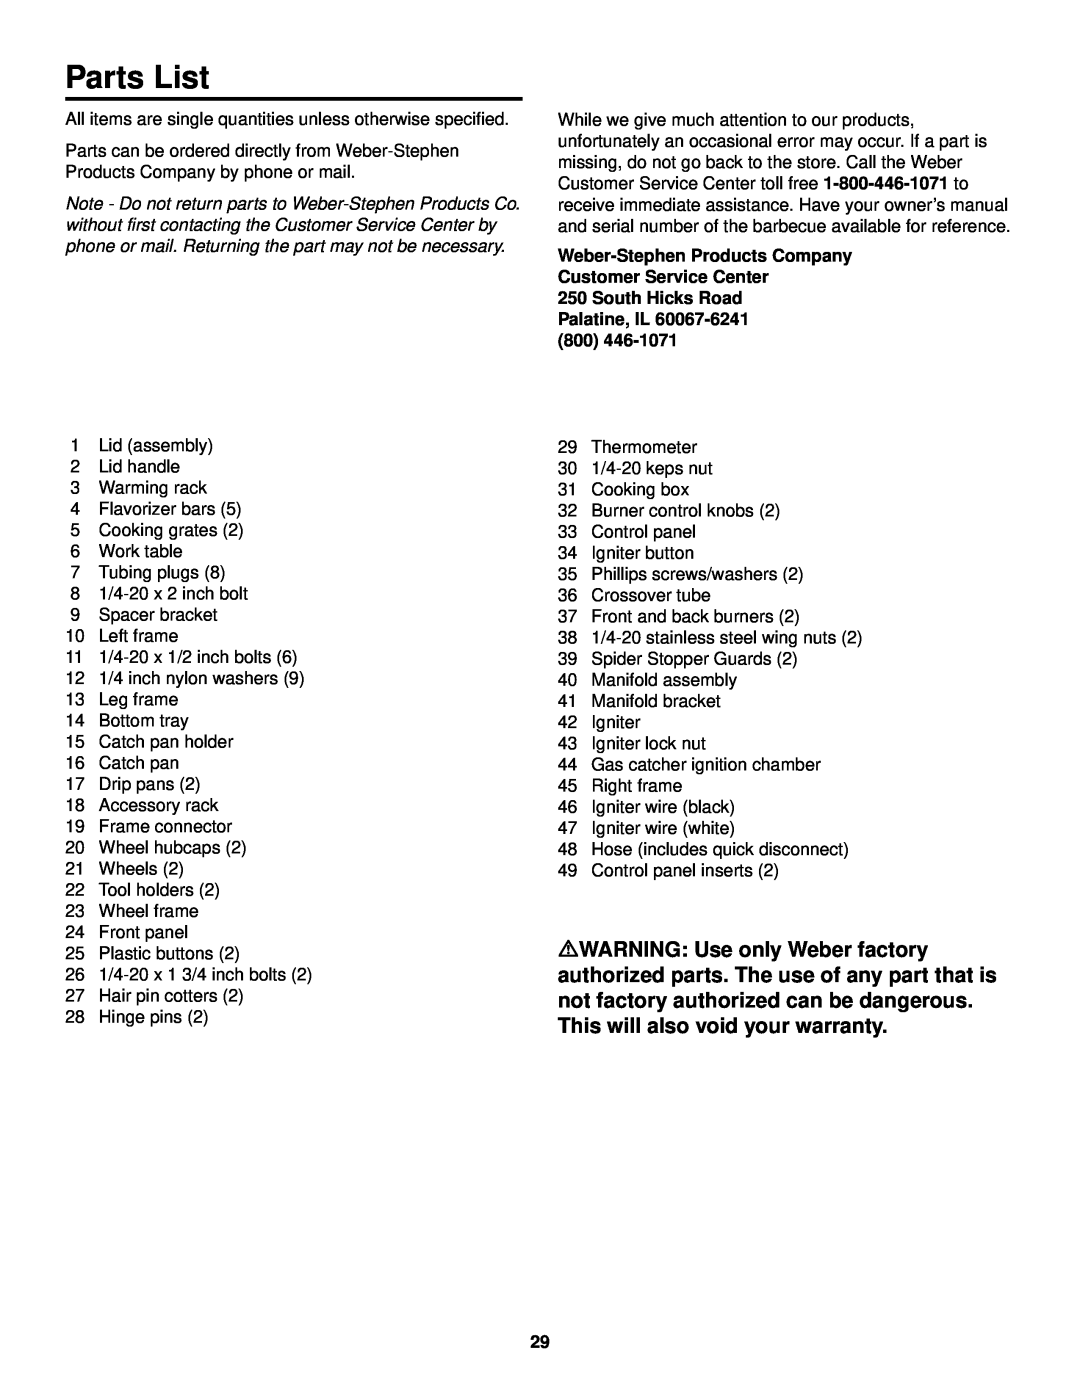 Weber 500 LX Parts List, Weber-Stephen Products Company Customer Service Center, South Hicks Road Palatine, IL 60067-6241 